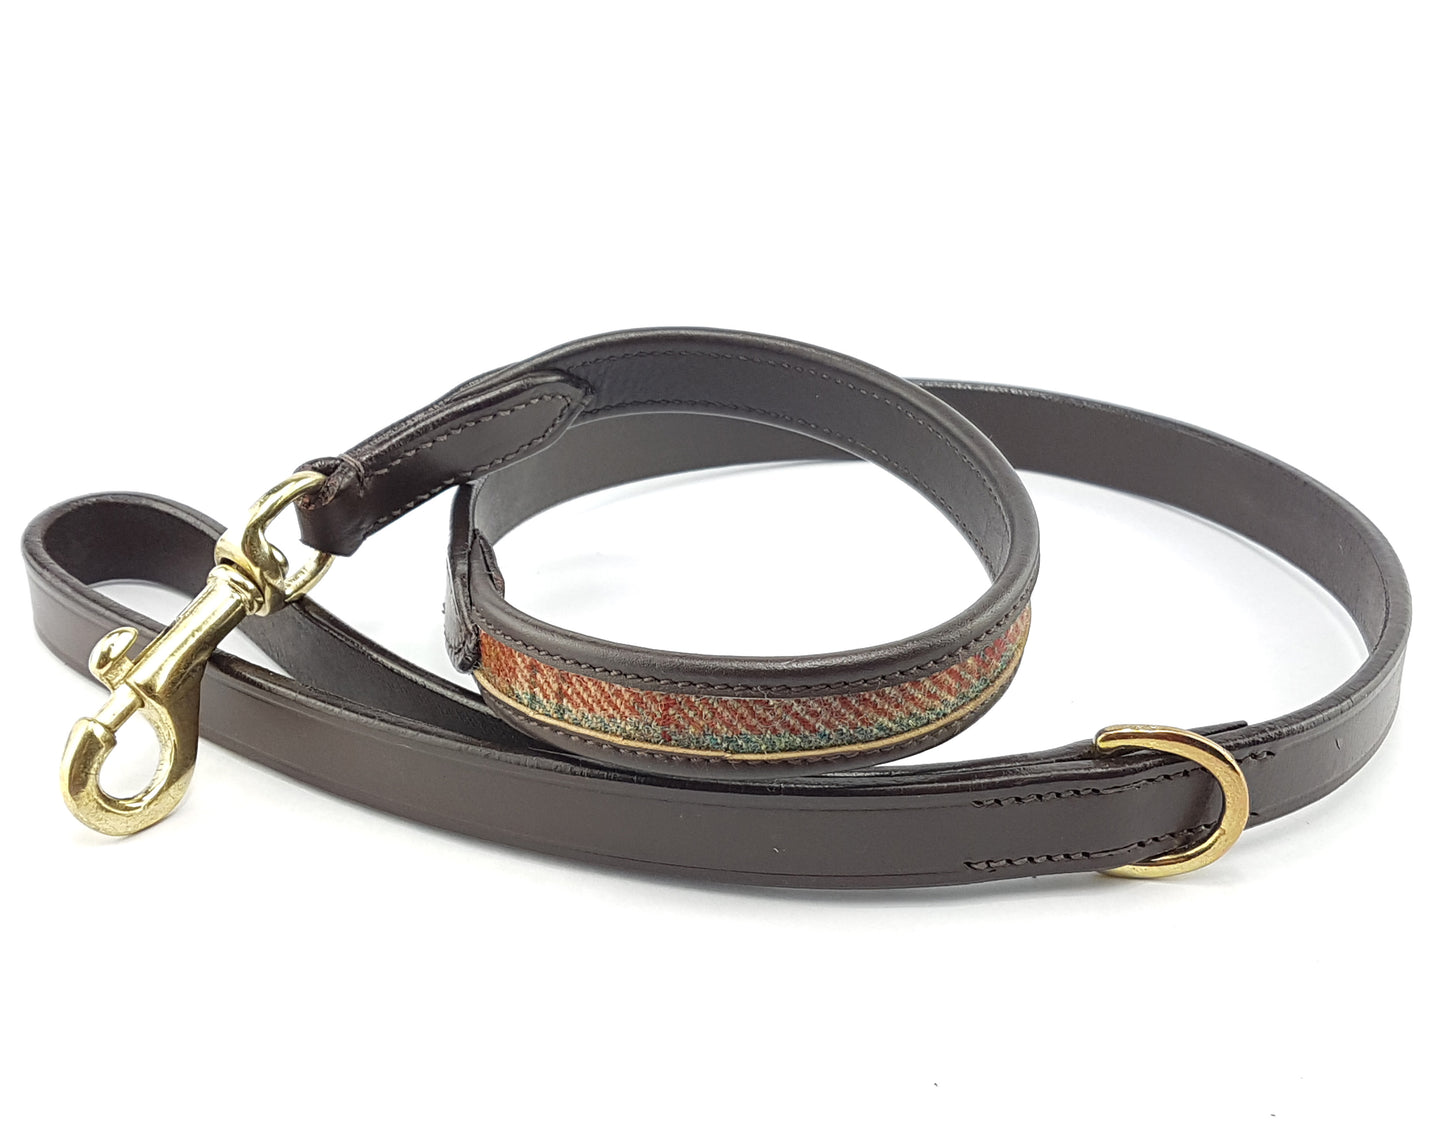 tweed and leather dog lead